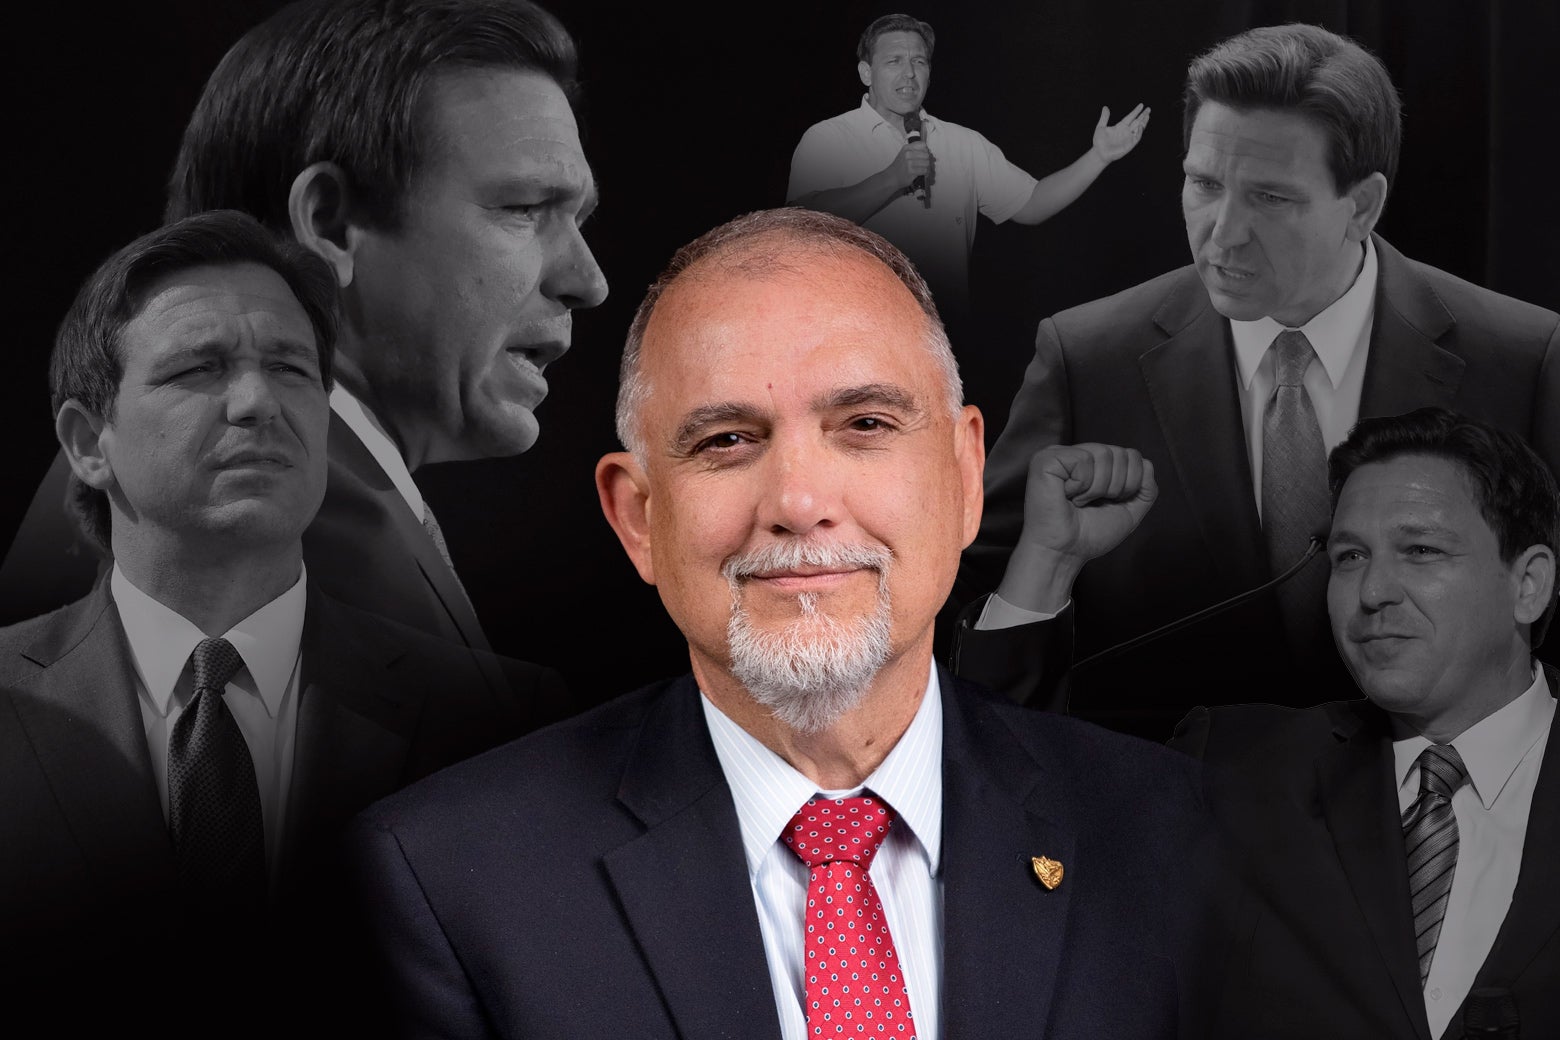 A middle-aged man in a red tie and dark suit smiles, while images of Ron DeSantis are in the background.